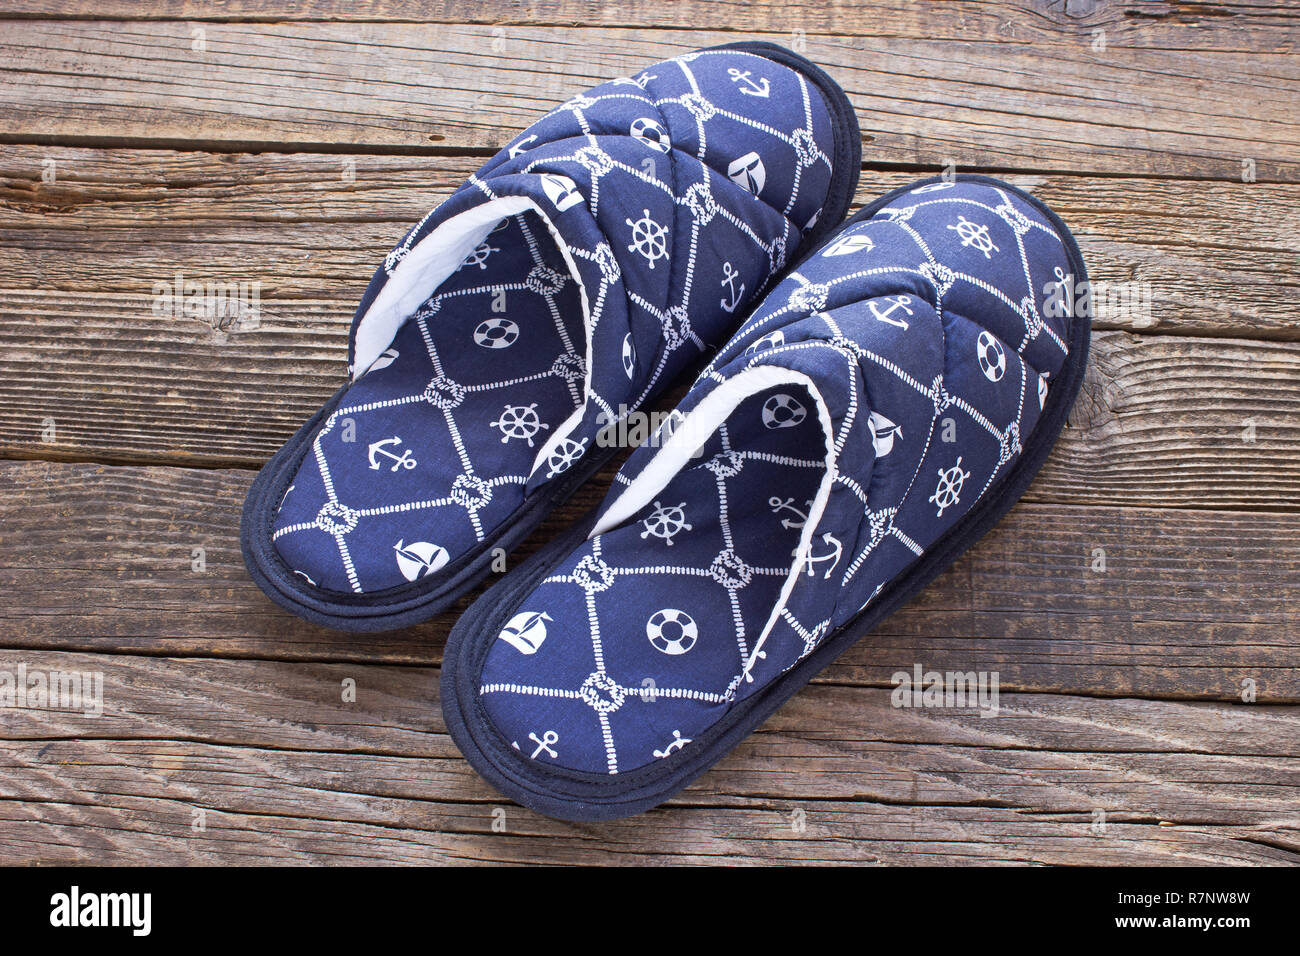 House slippers on old wooden floor Stock Photo